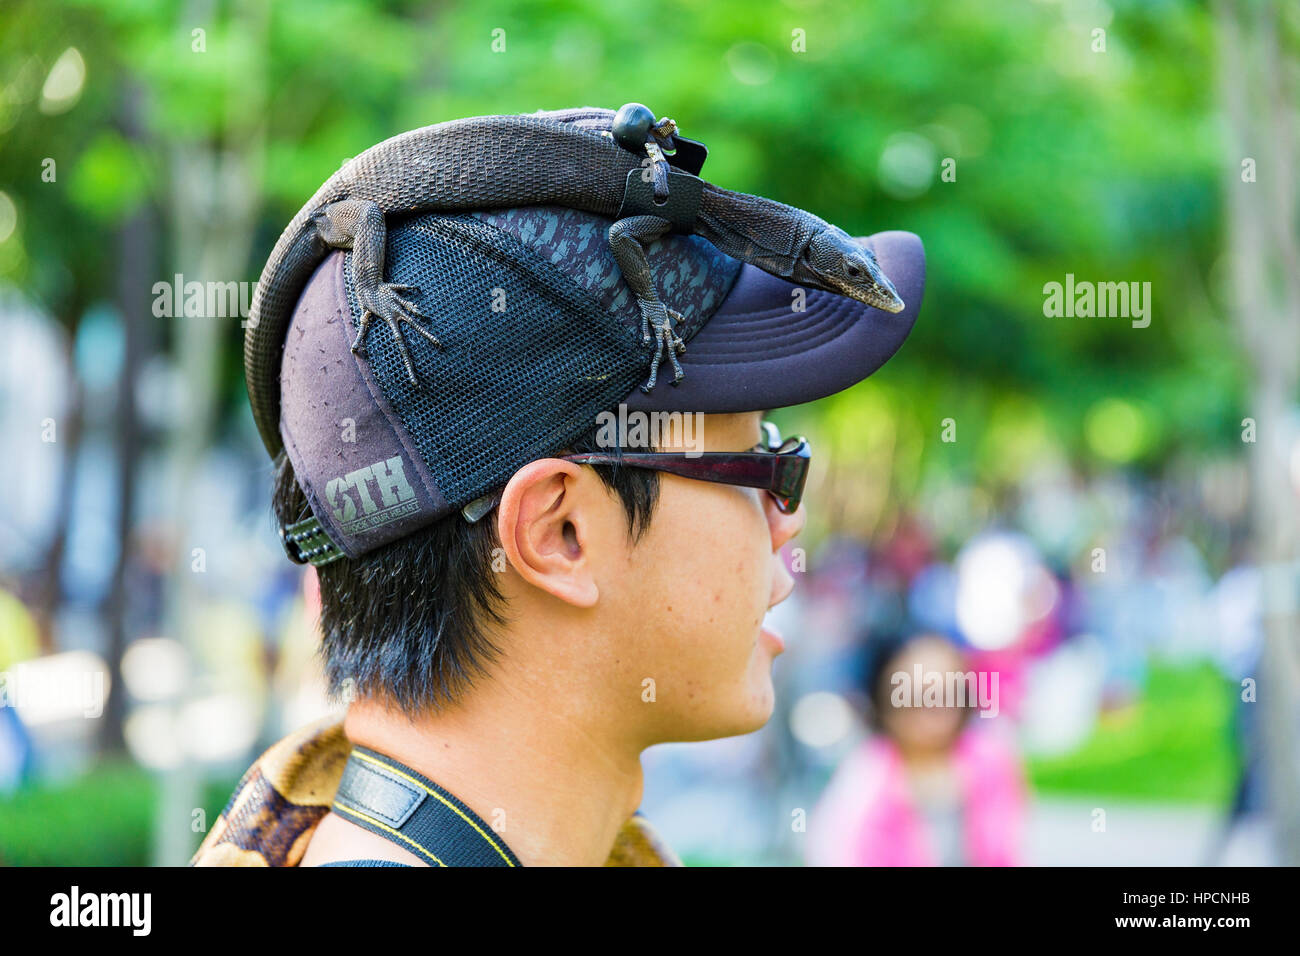 TAICHUNG, TAIWAN - AUGUST 23: Man in a park with his pet lizard on his head. Local people sometimes bring their pets to this park on 23 August, 2014,  Stock Photo